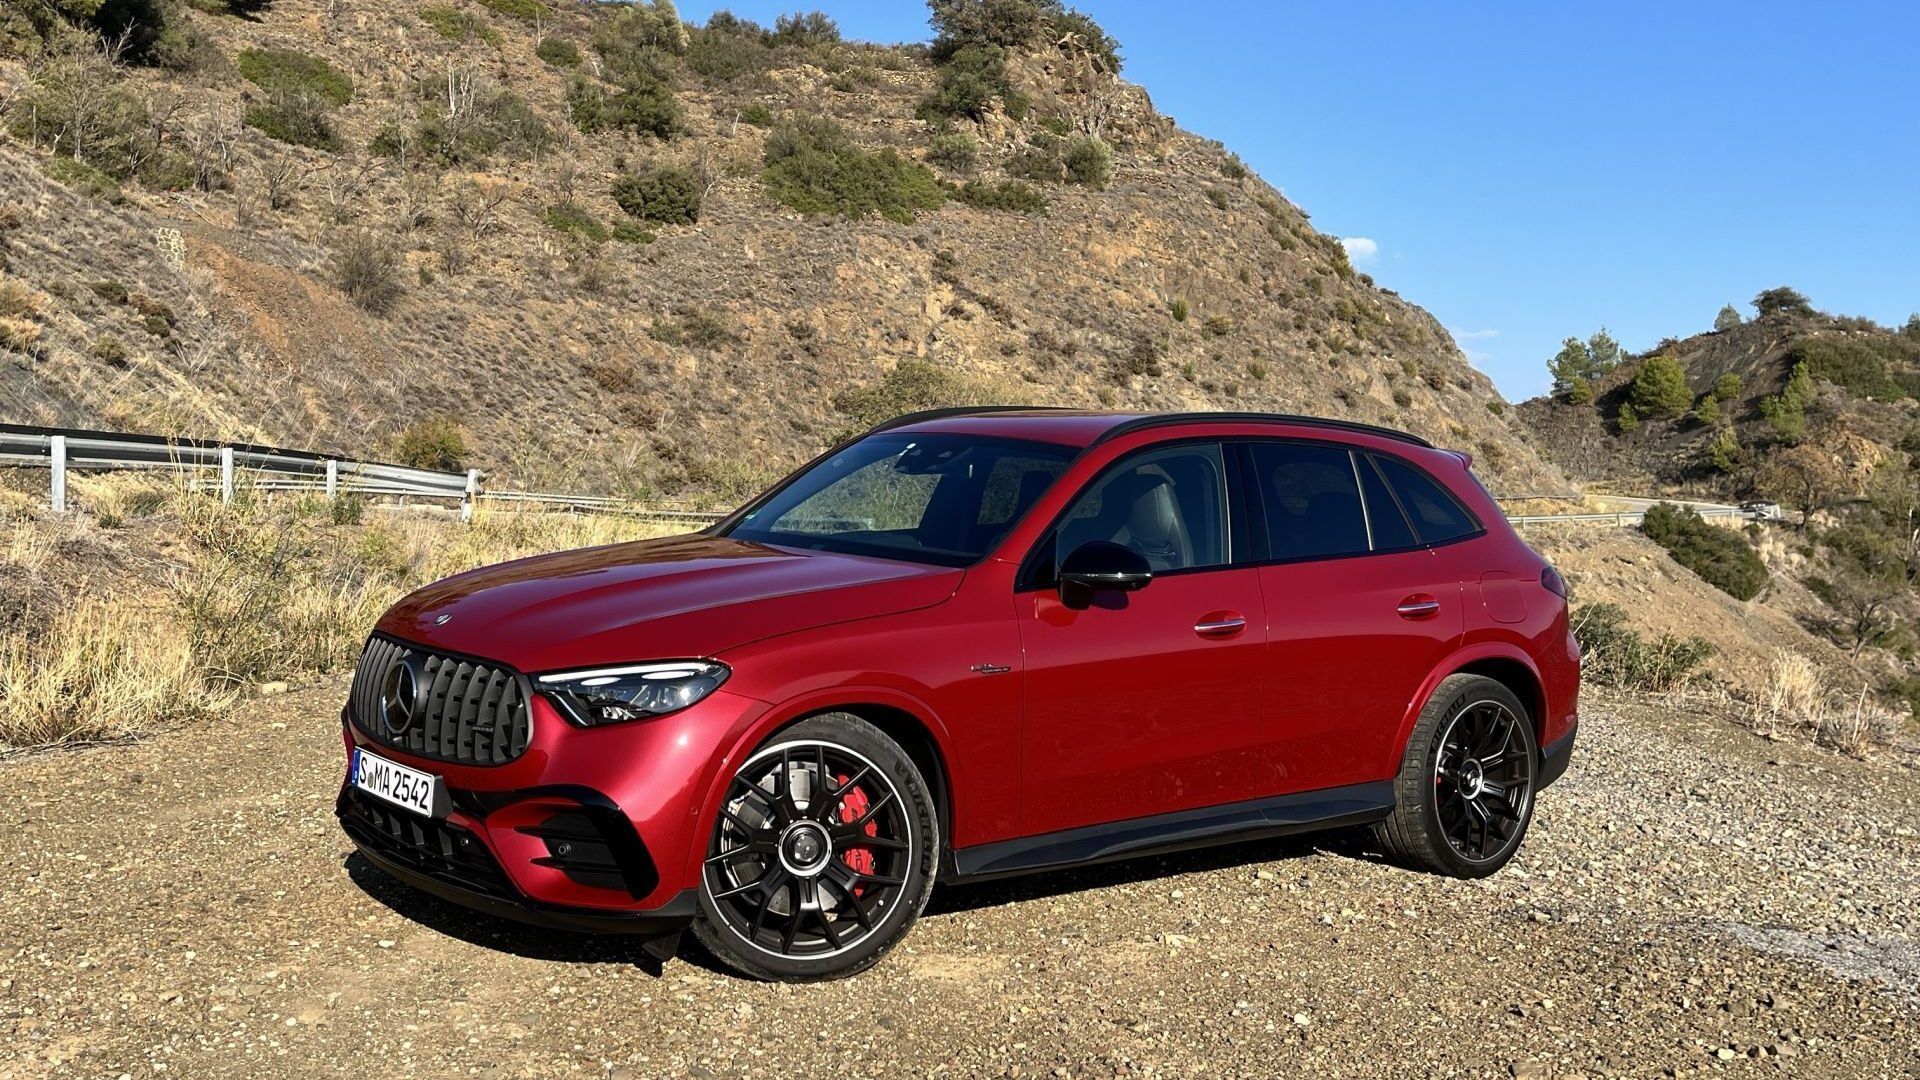 2025 Mercedes-AMG GLC 63 SUV: Review, Trims, Specs, Price, New